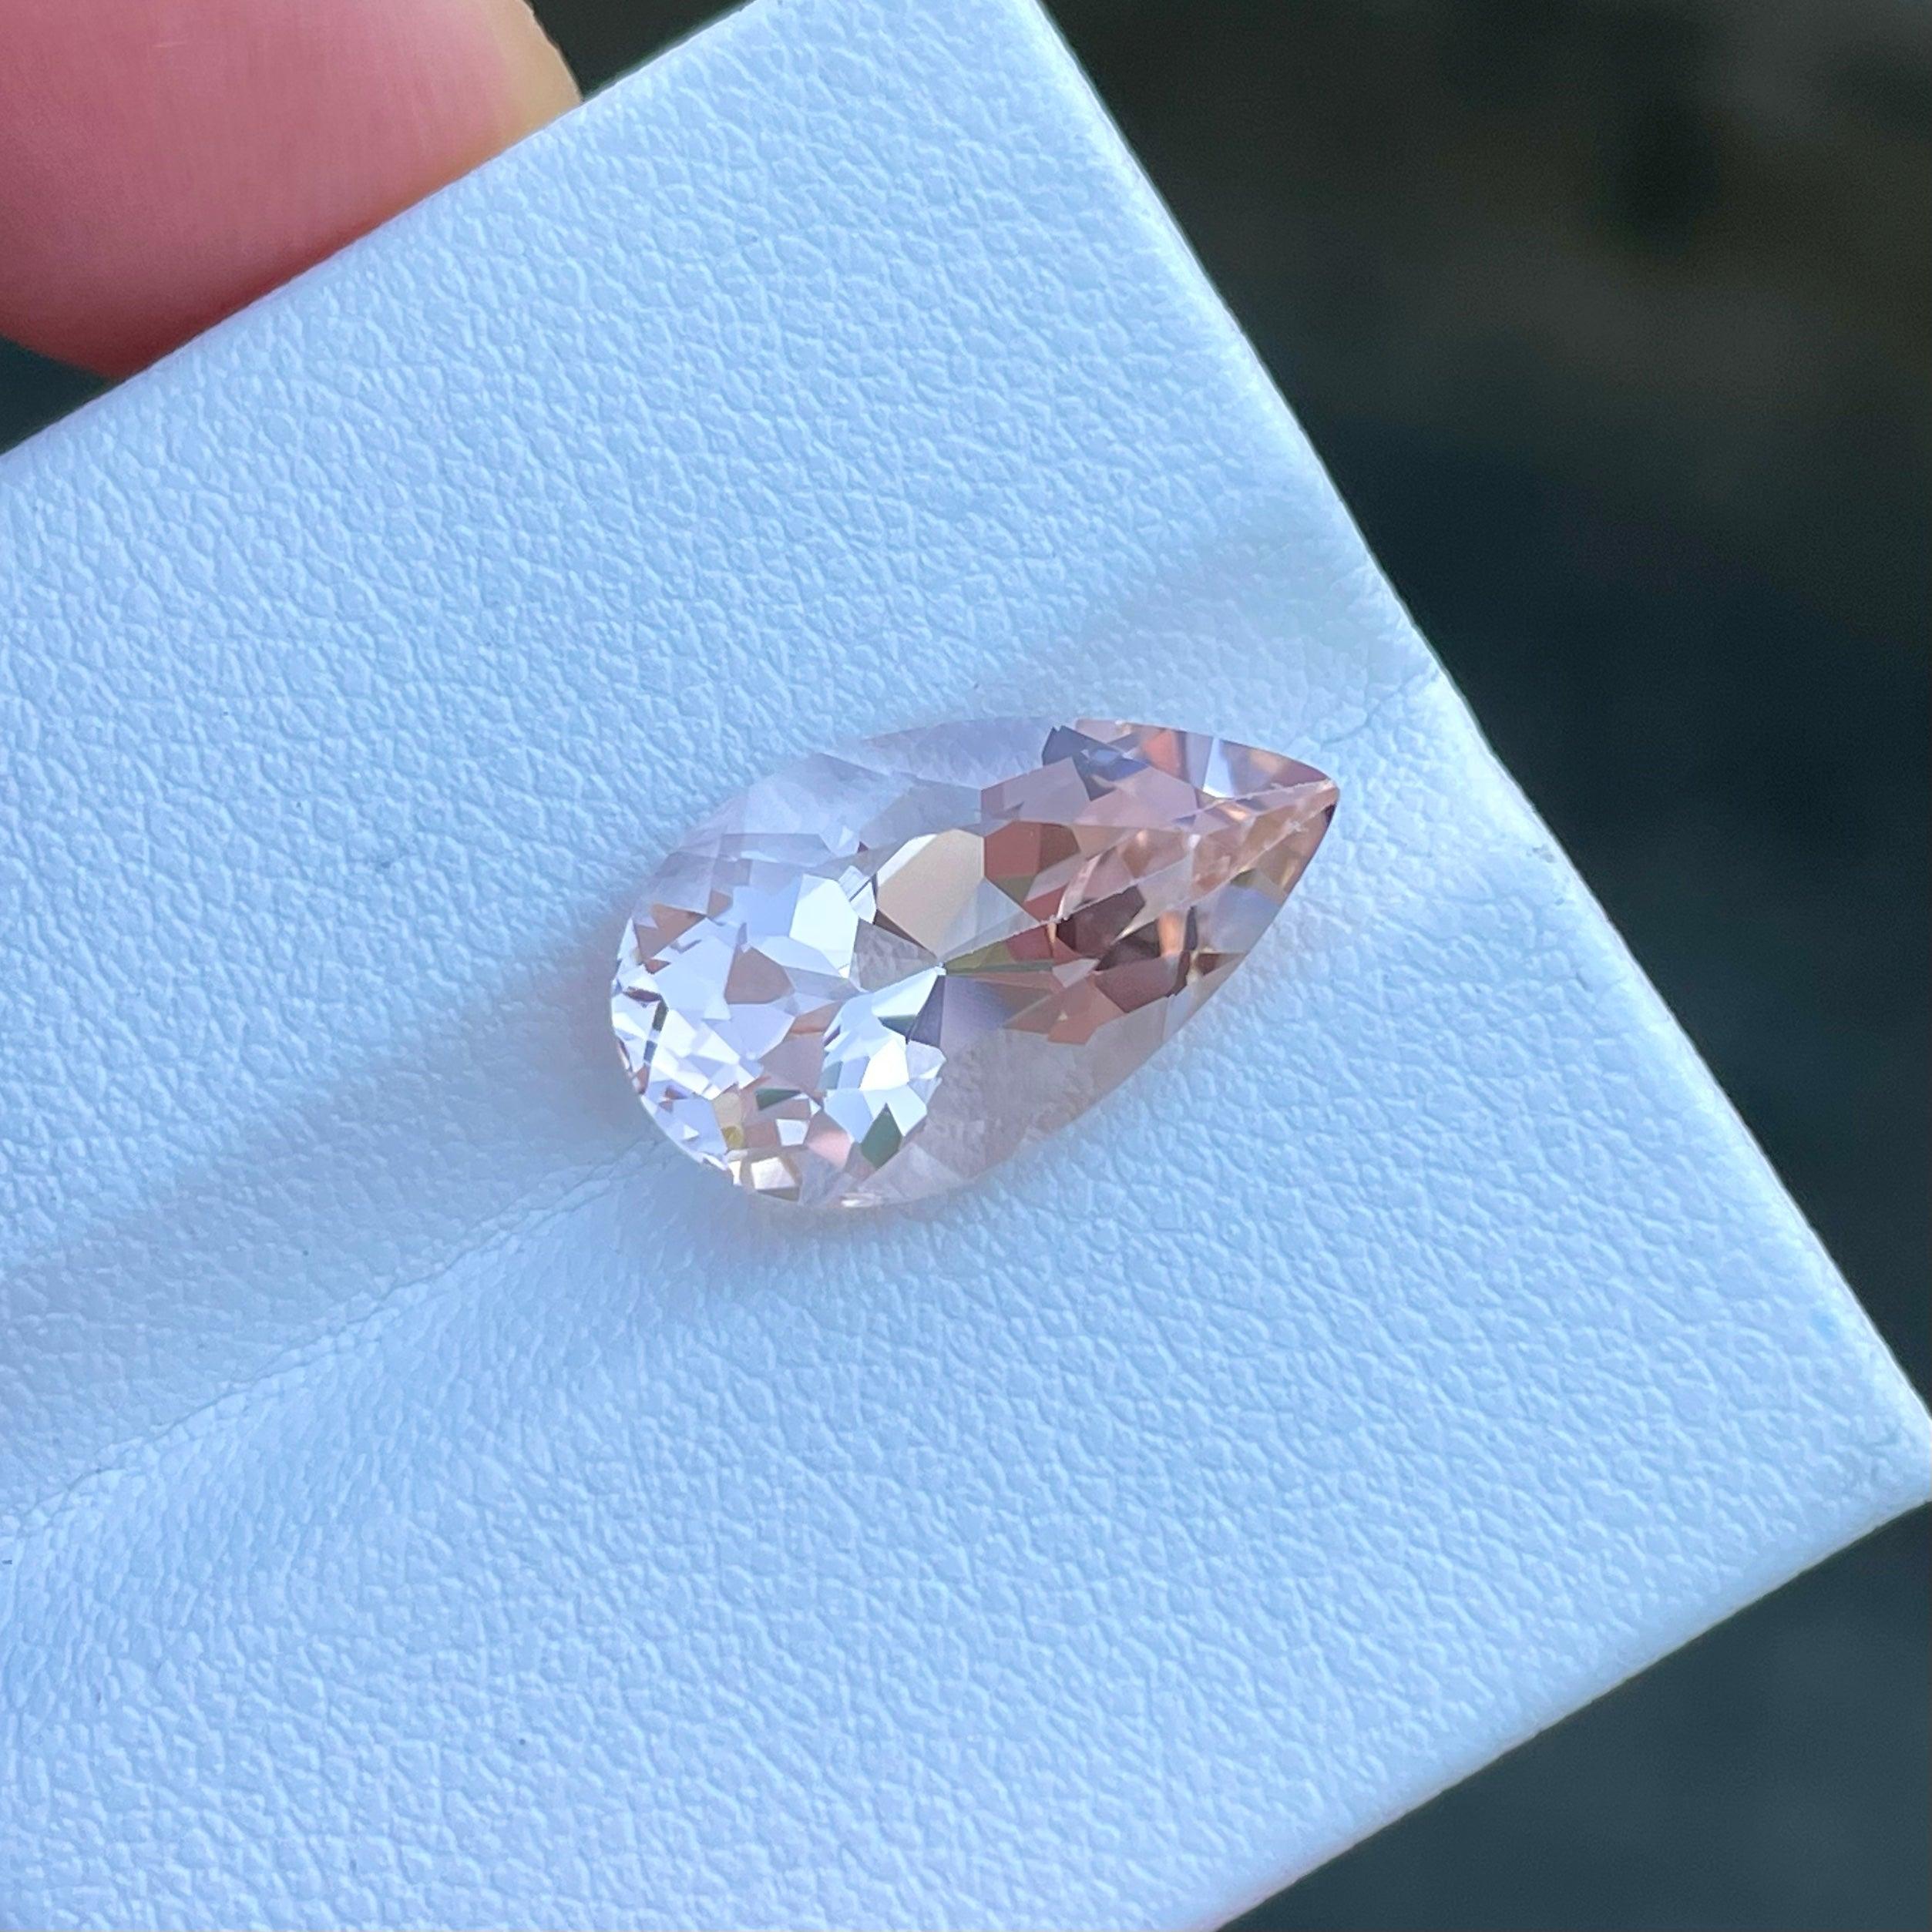 Beautiful Natural Pink Morganite Gemstone, available For Sale At Wholesale Price Natural High Quality 6.22 Carats Loupe Clean Clarity Loose Morganite From Nigeria.

Product Information:
GEMSTONE TYPE:	Beautiful Natural Pink Morganite